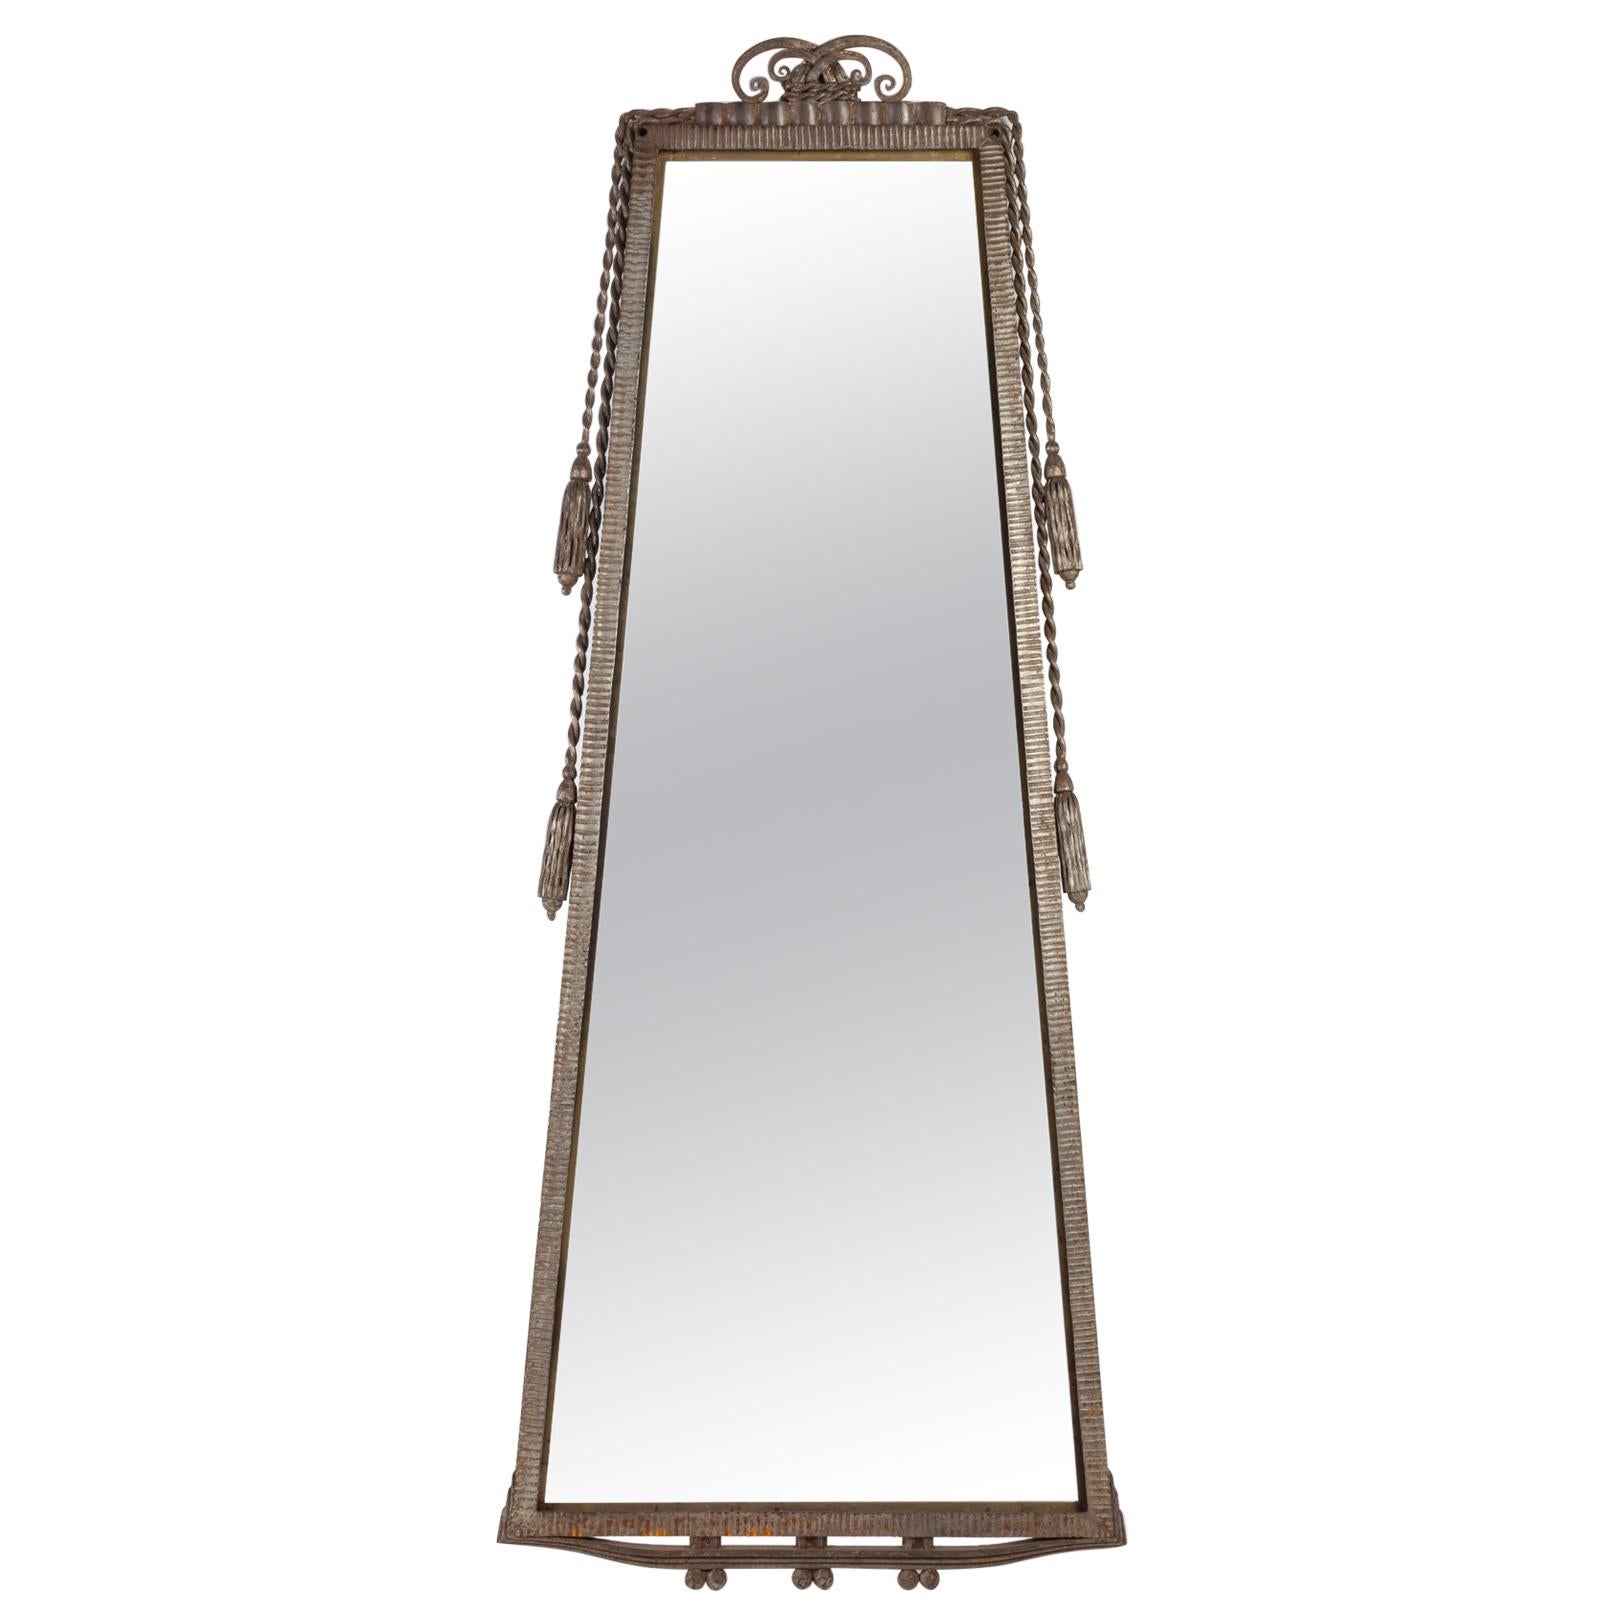 Trapeze Mirror frame by Paul Kiss, Wrought Iron, Art Deco, 1930